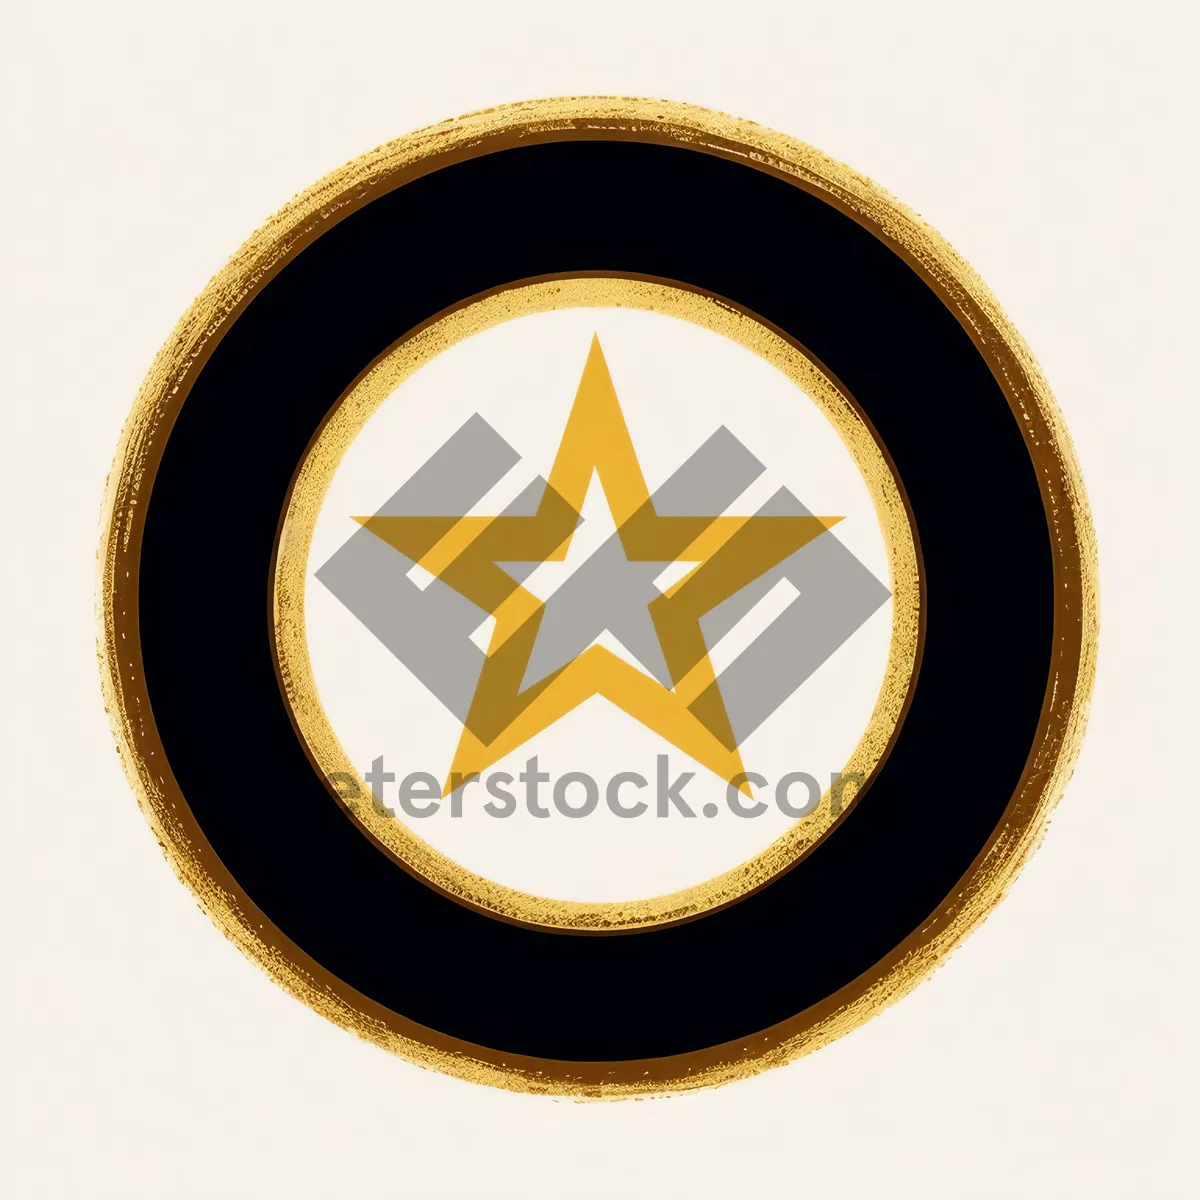 Picture of Glossy Golden Heraldry Symbol Button